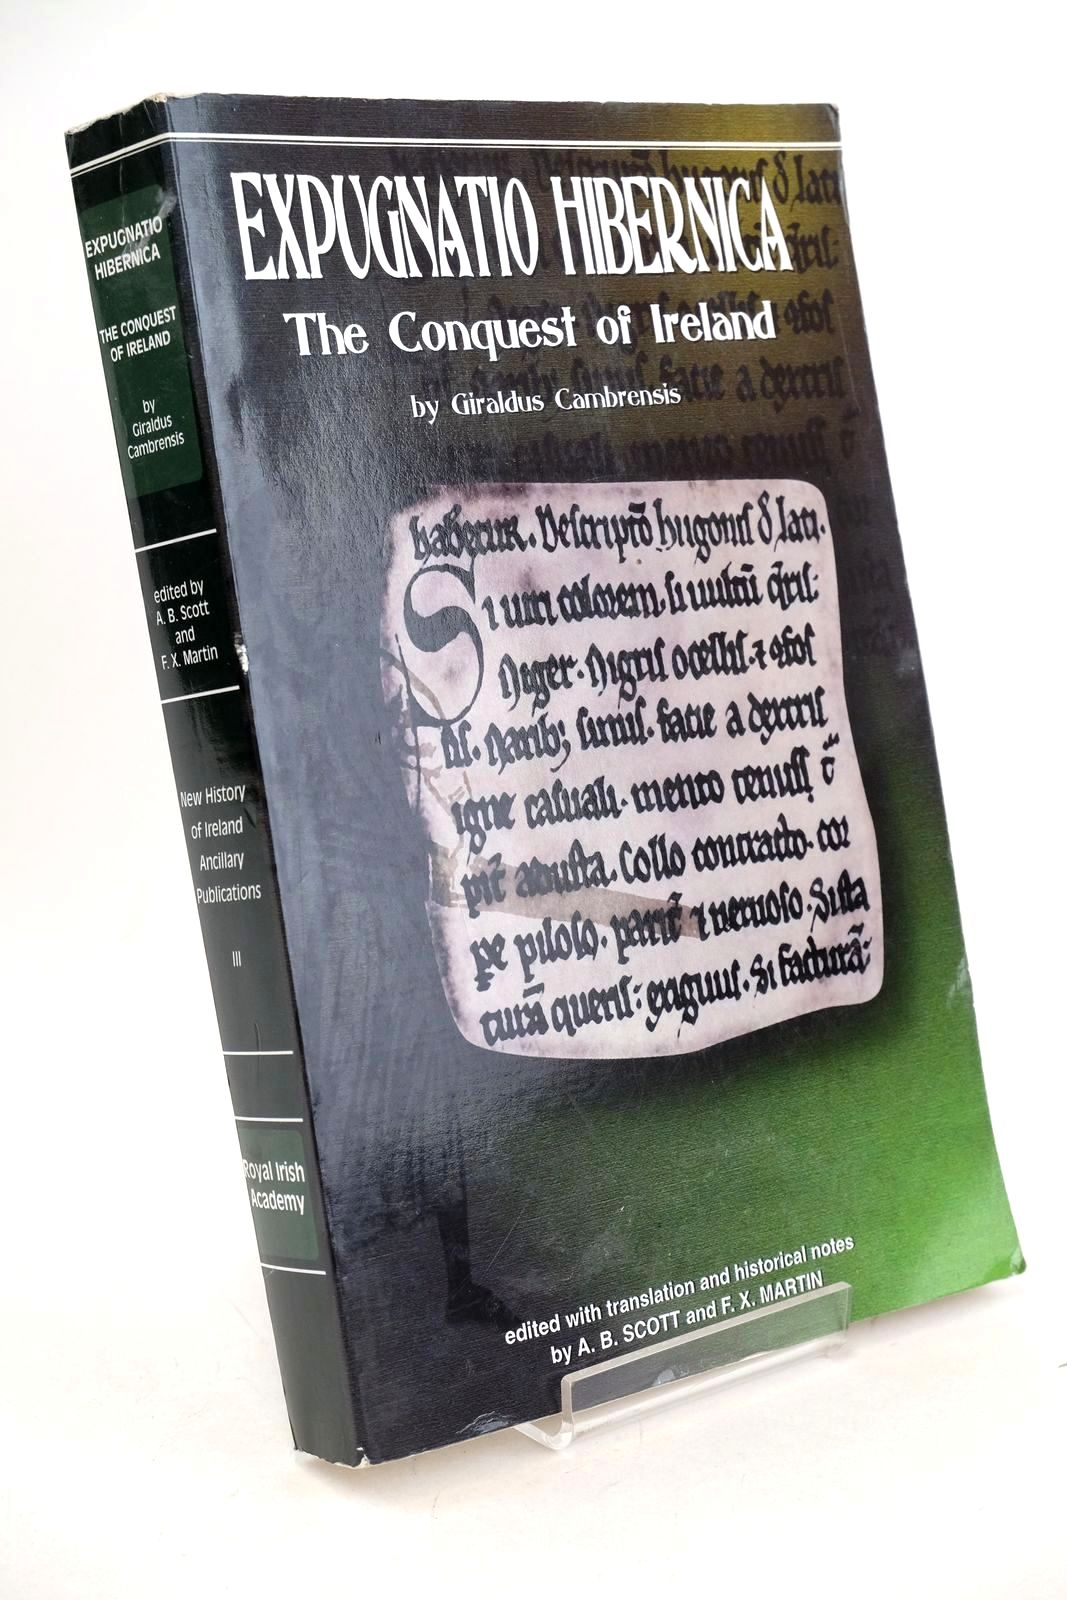 Photo of EXPUGNATIO HIBERNICA: THE CONQUEST OF IRELAND written by Cambrensis, Giraldus Scott, A.B. Martin, F.X. published by Royal Irish Academy (STOCK CODE: 1327146)  for sale by Stella & Rose's Books